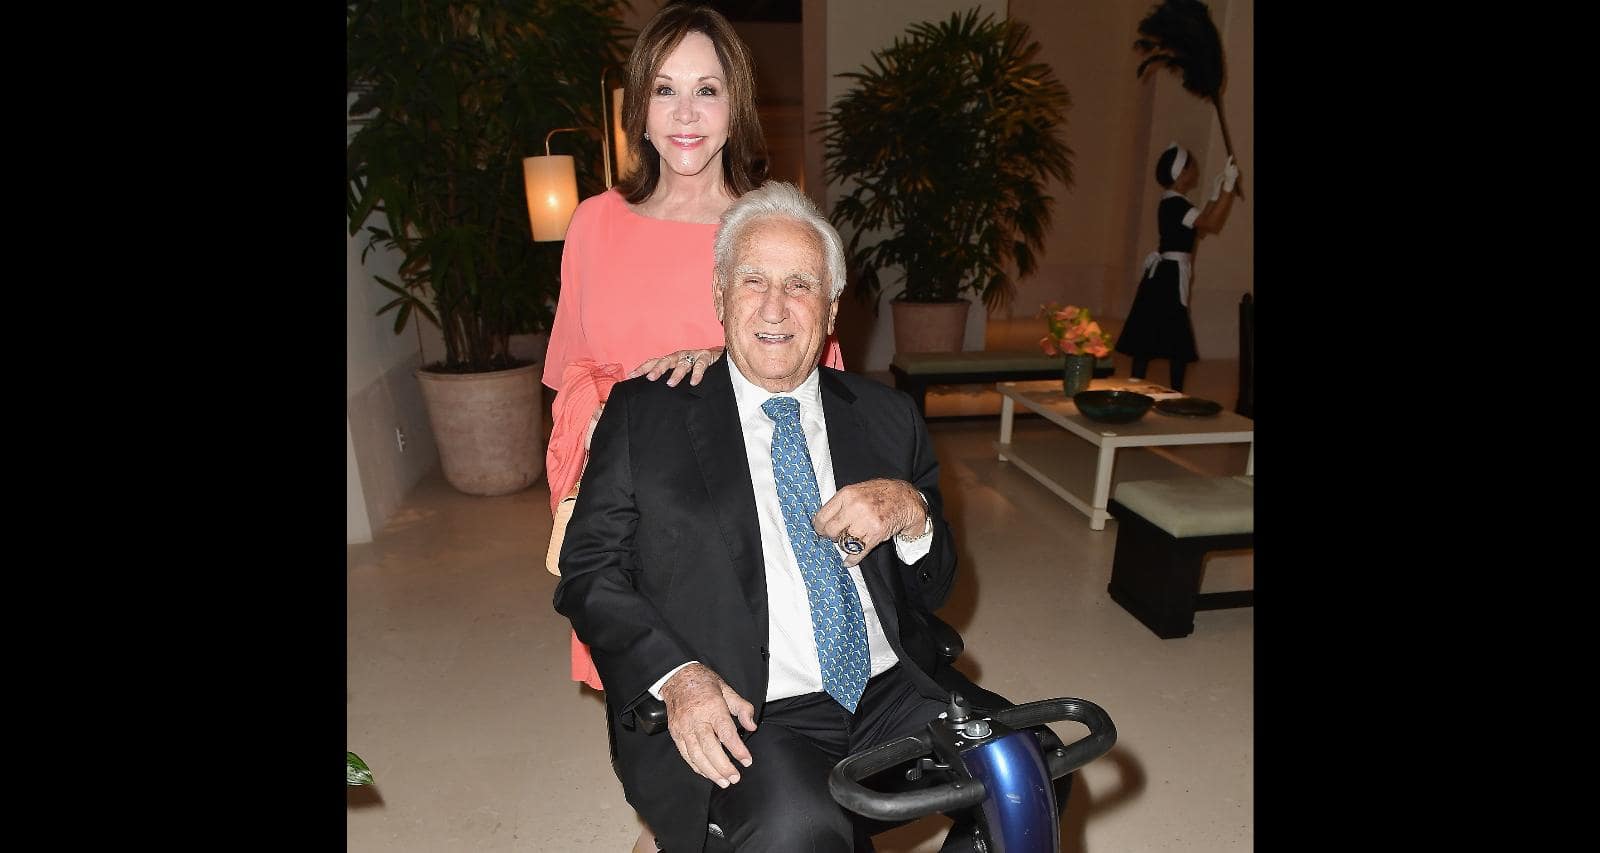 Mary Anne Shula Wiki, Age, Husbands, Early Life, Philanthropy and Facts About the Wife of NFL Coach, Don Shula Who Died